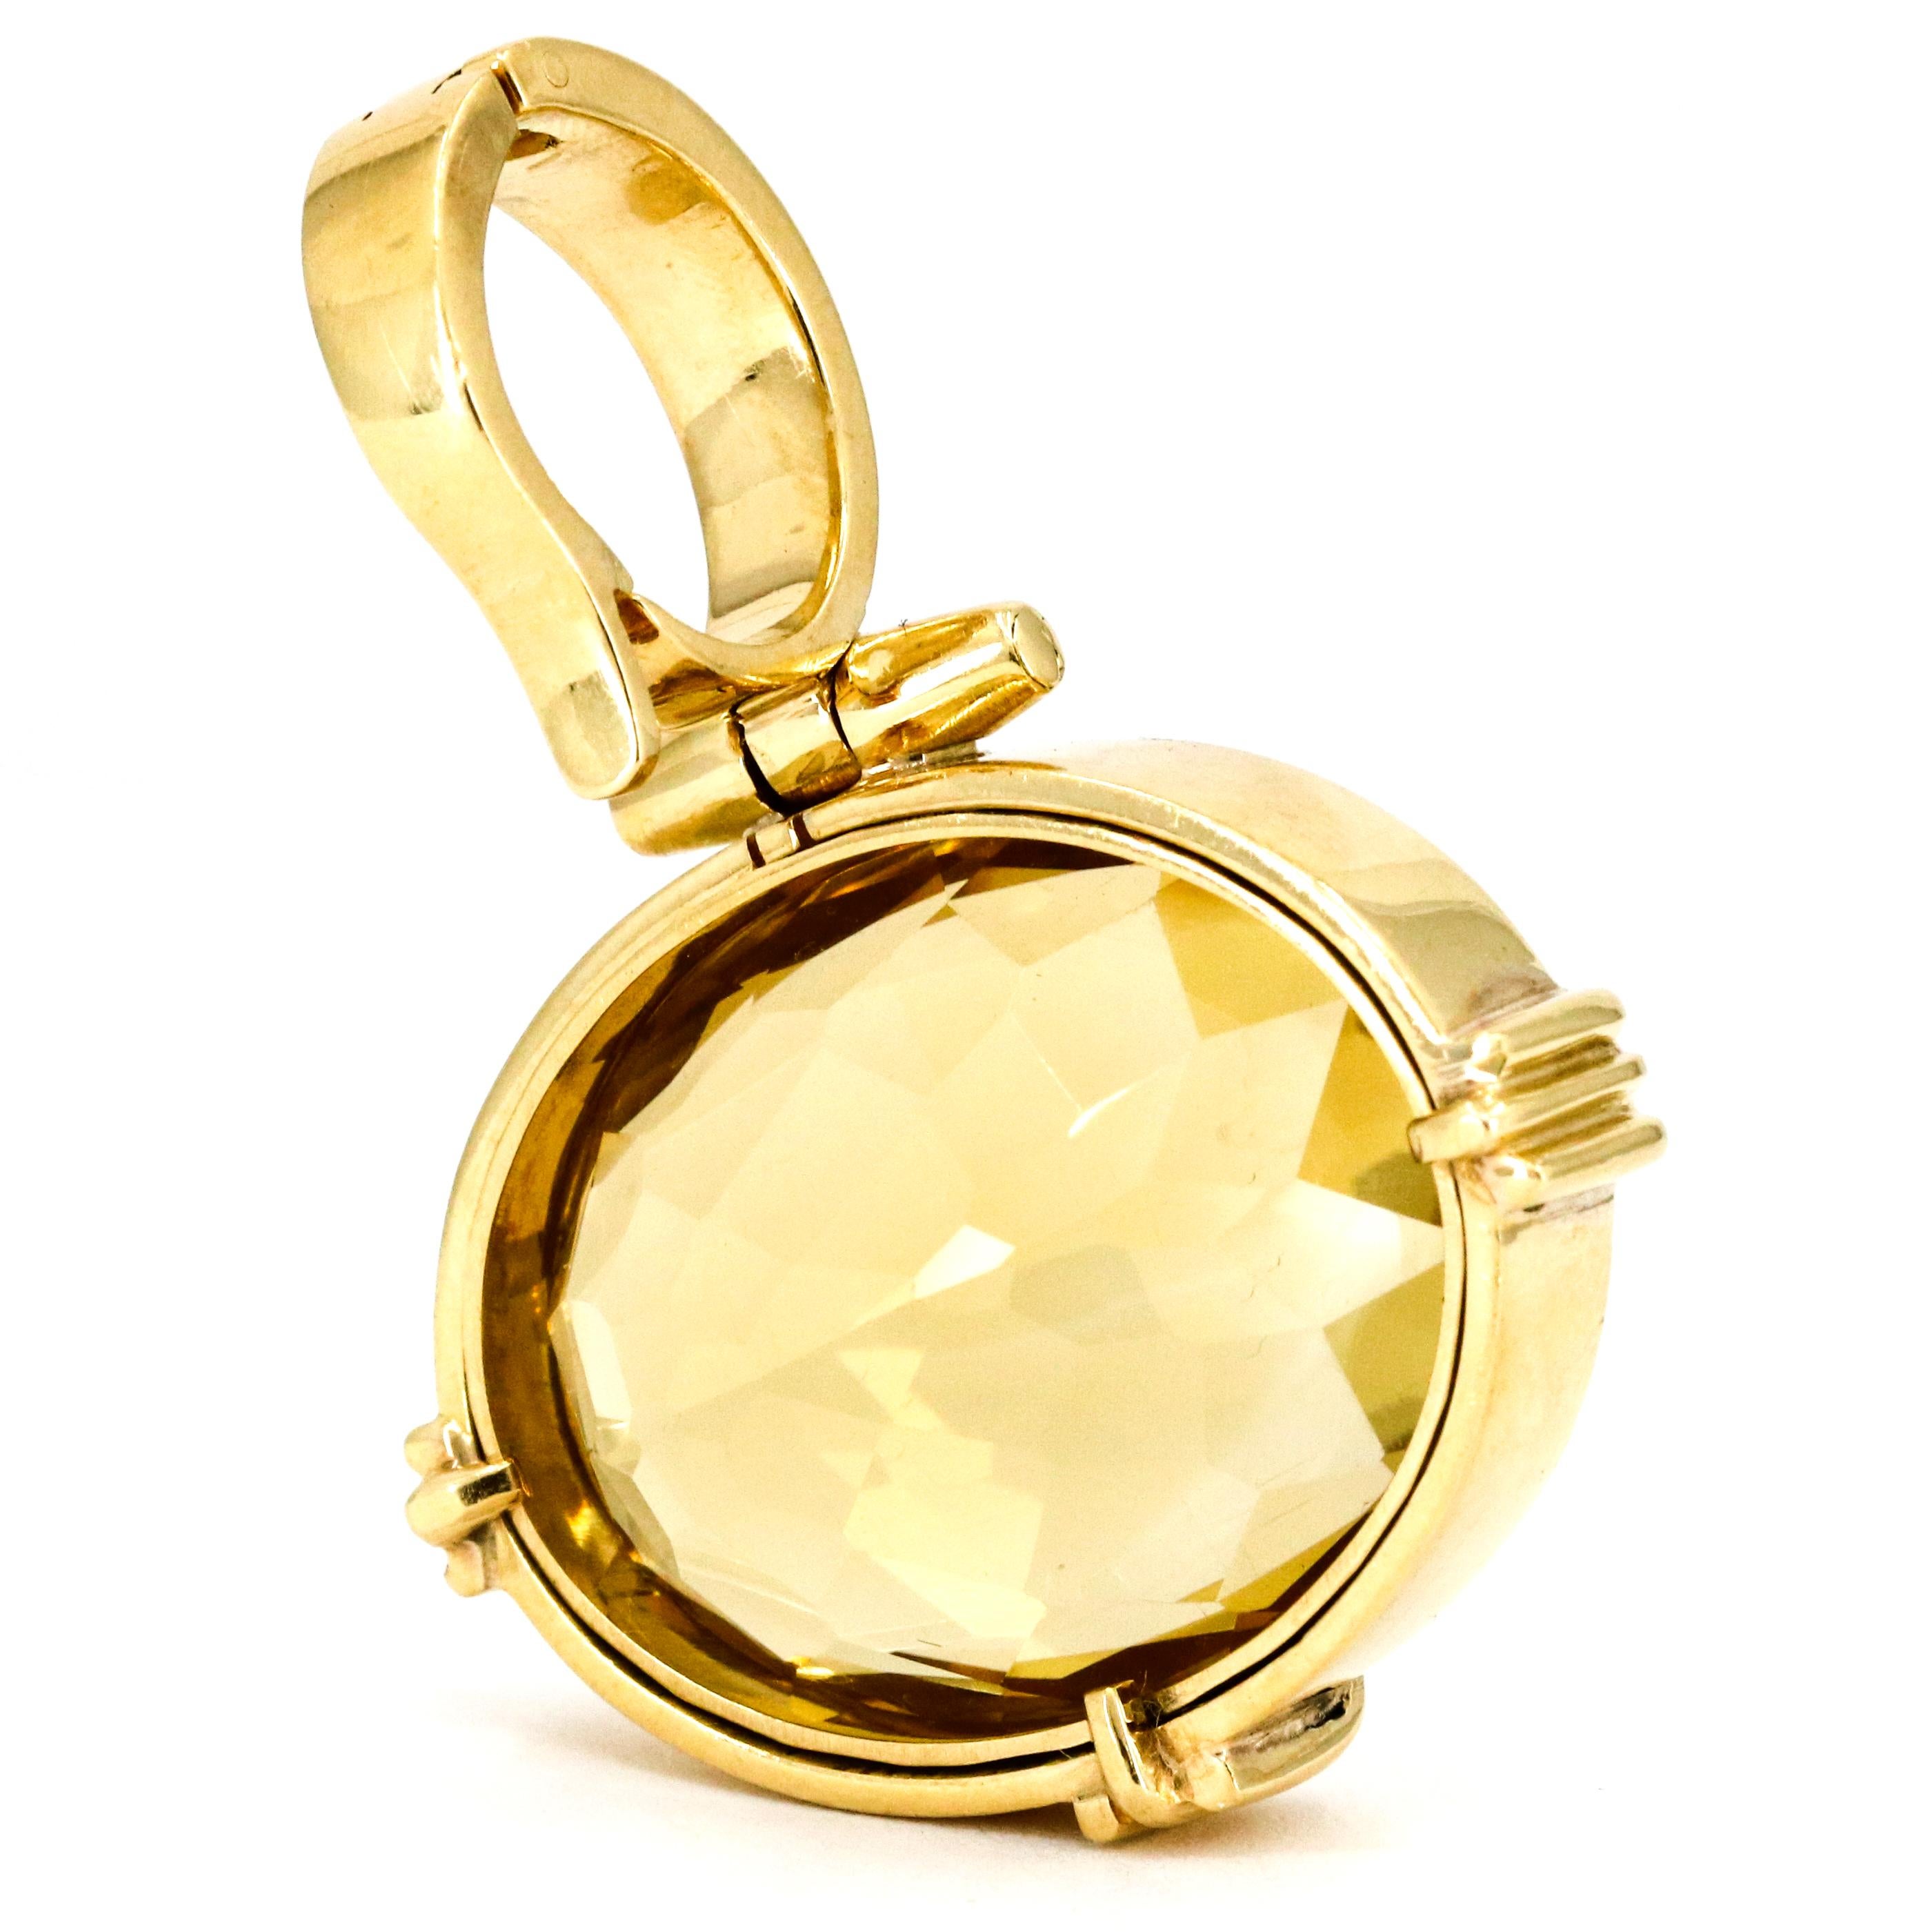 Oval cut Citrine pendant in 18-karat yellow gold with large enhancer bale. 

Height, 45mm
Width, 31mm
Depth, 13.5mm
Weight, 26.6 grams 